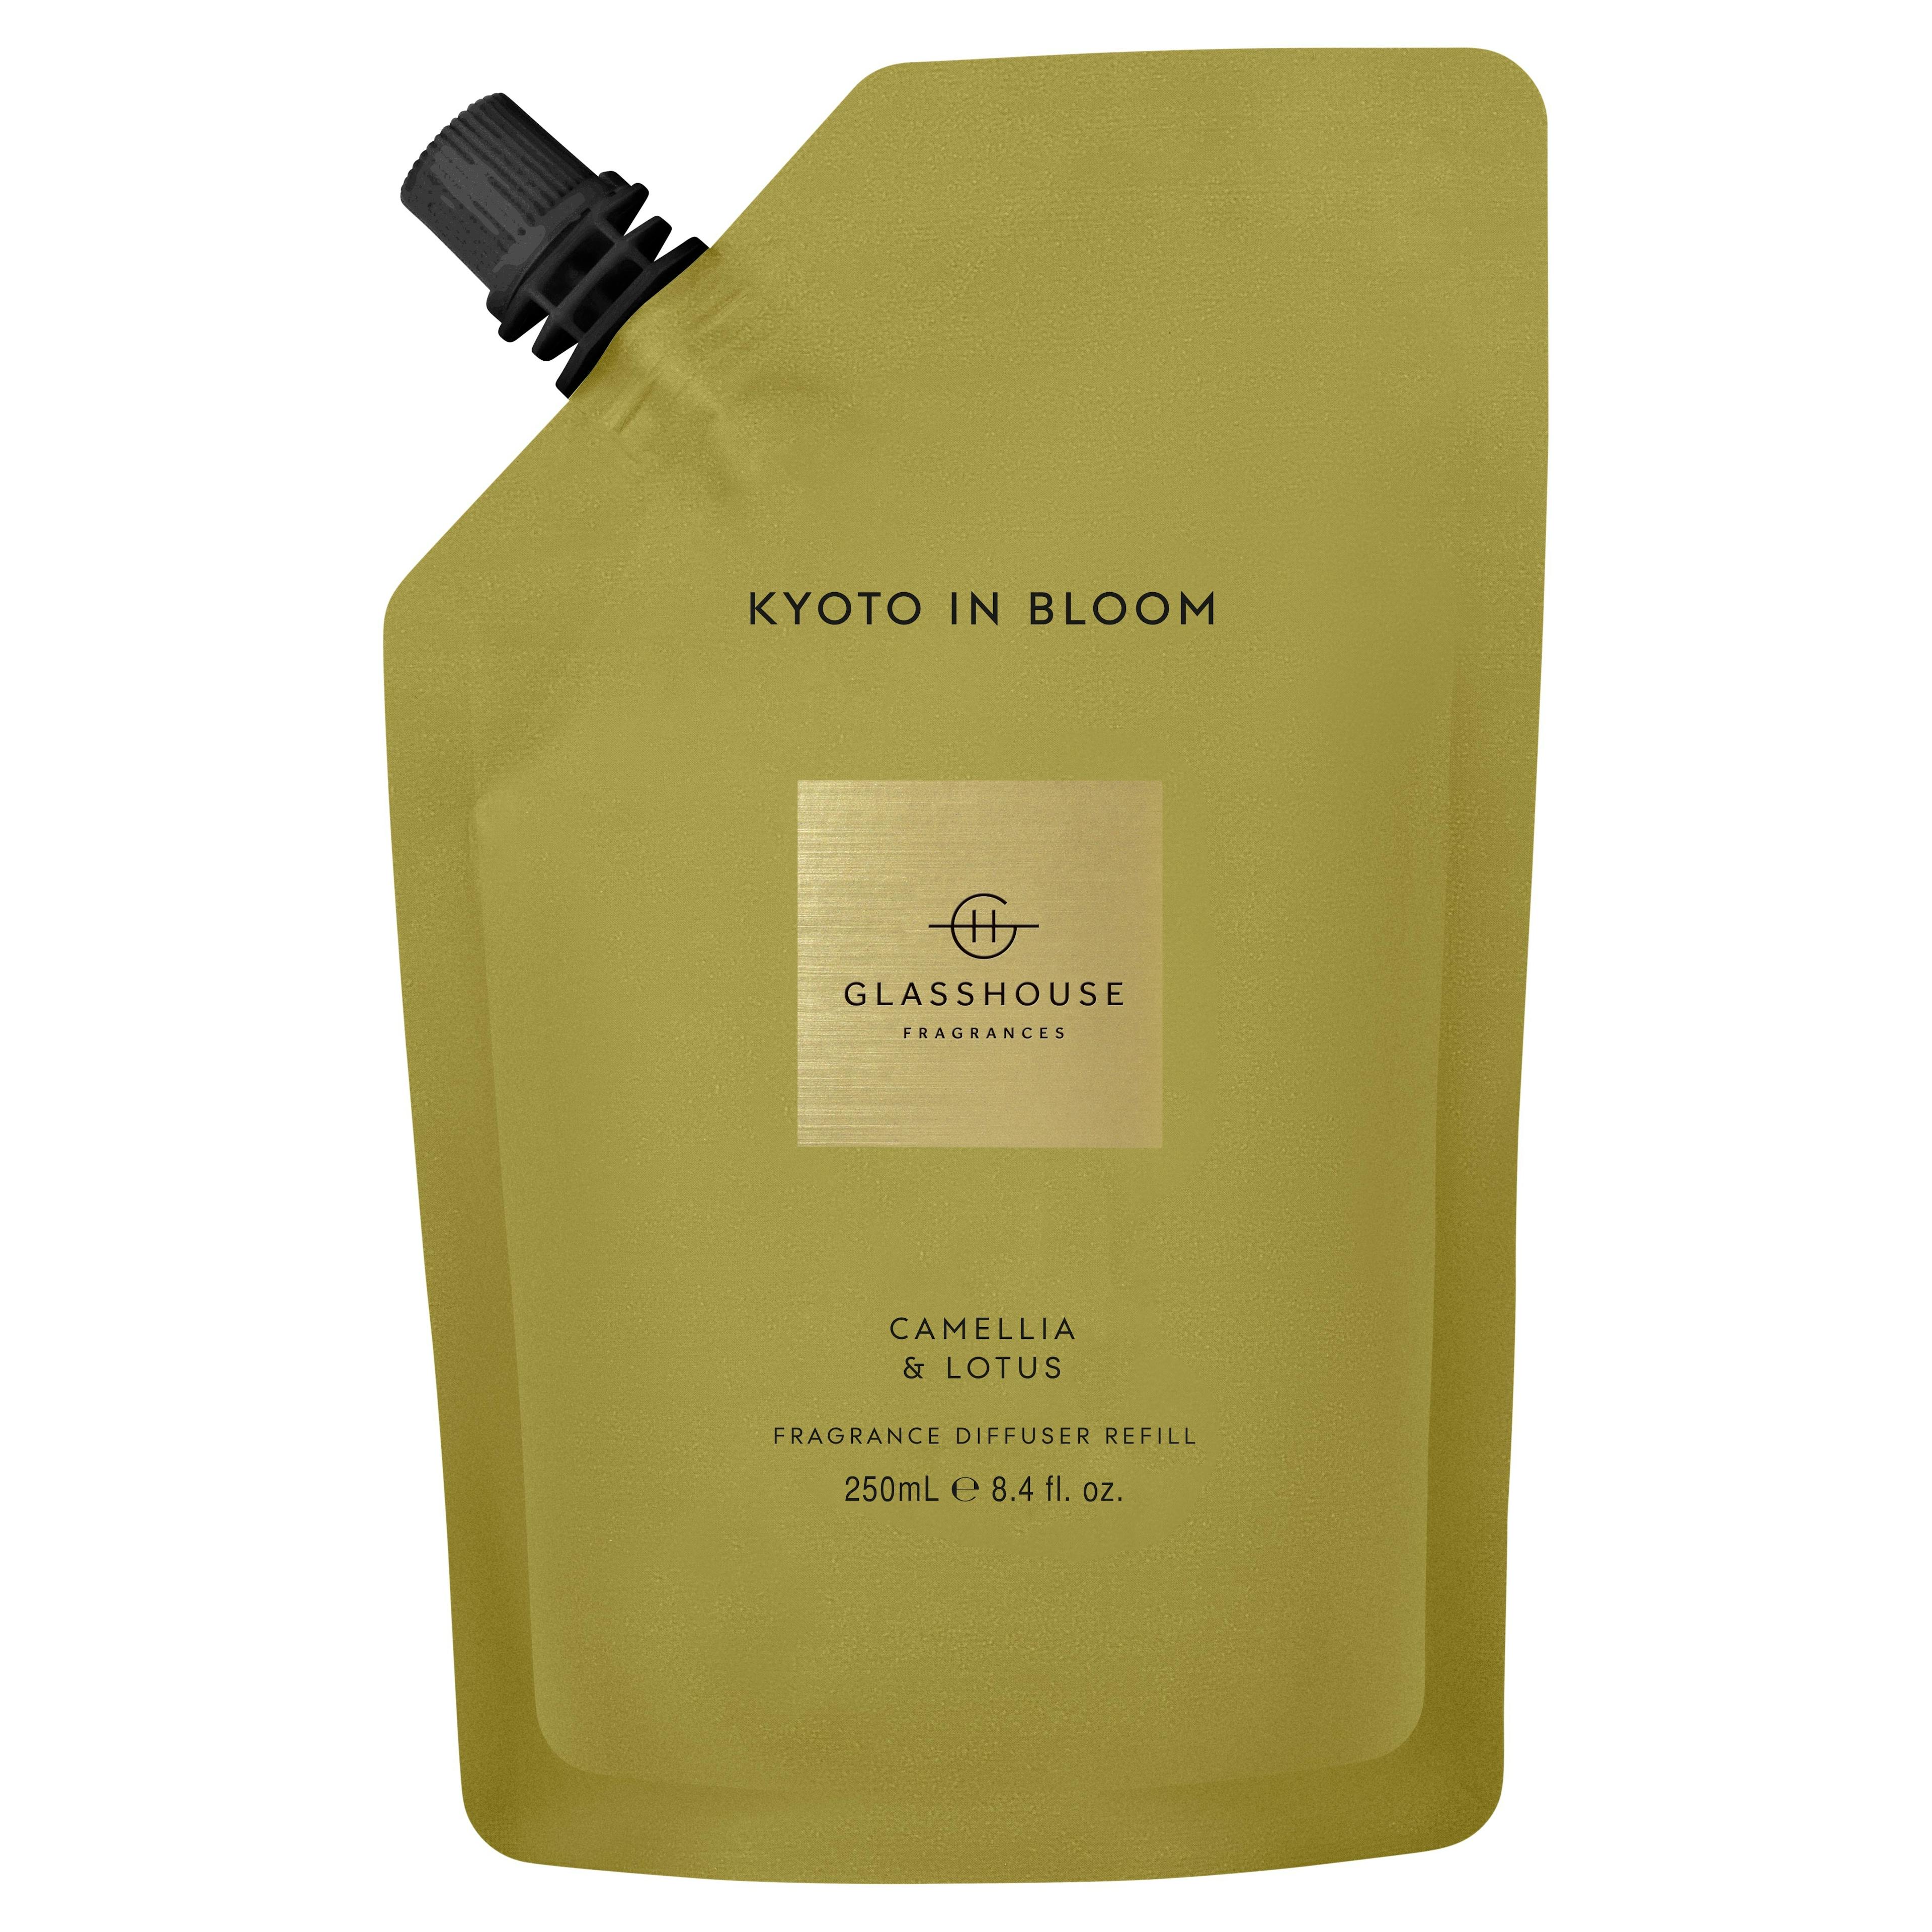 Glasshouse Frangrances Diffuser Refill Pouch 250ml - KYOTO IN BLOOM